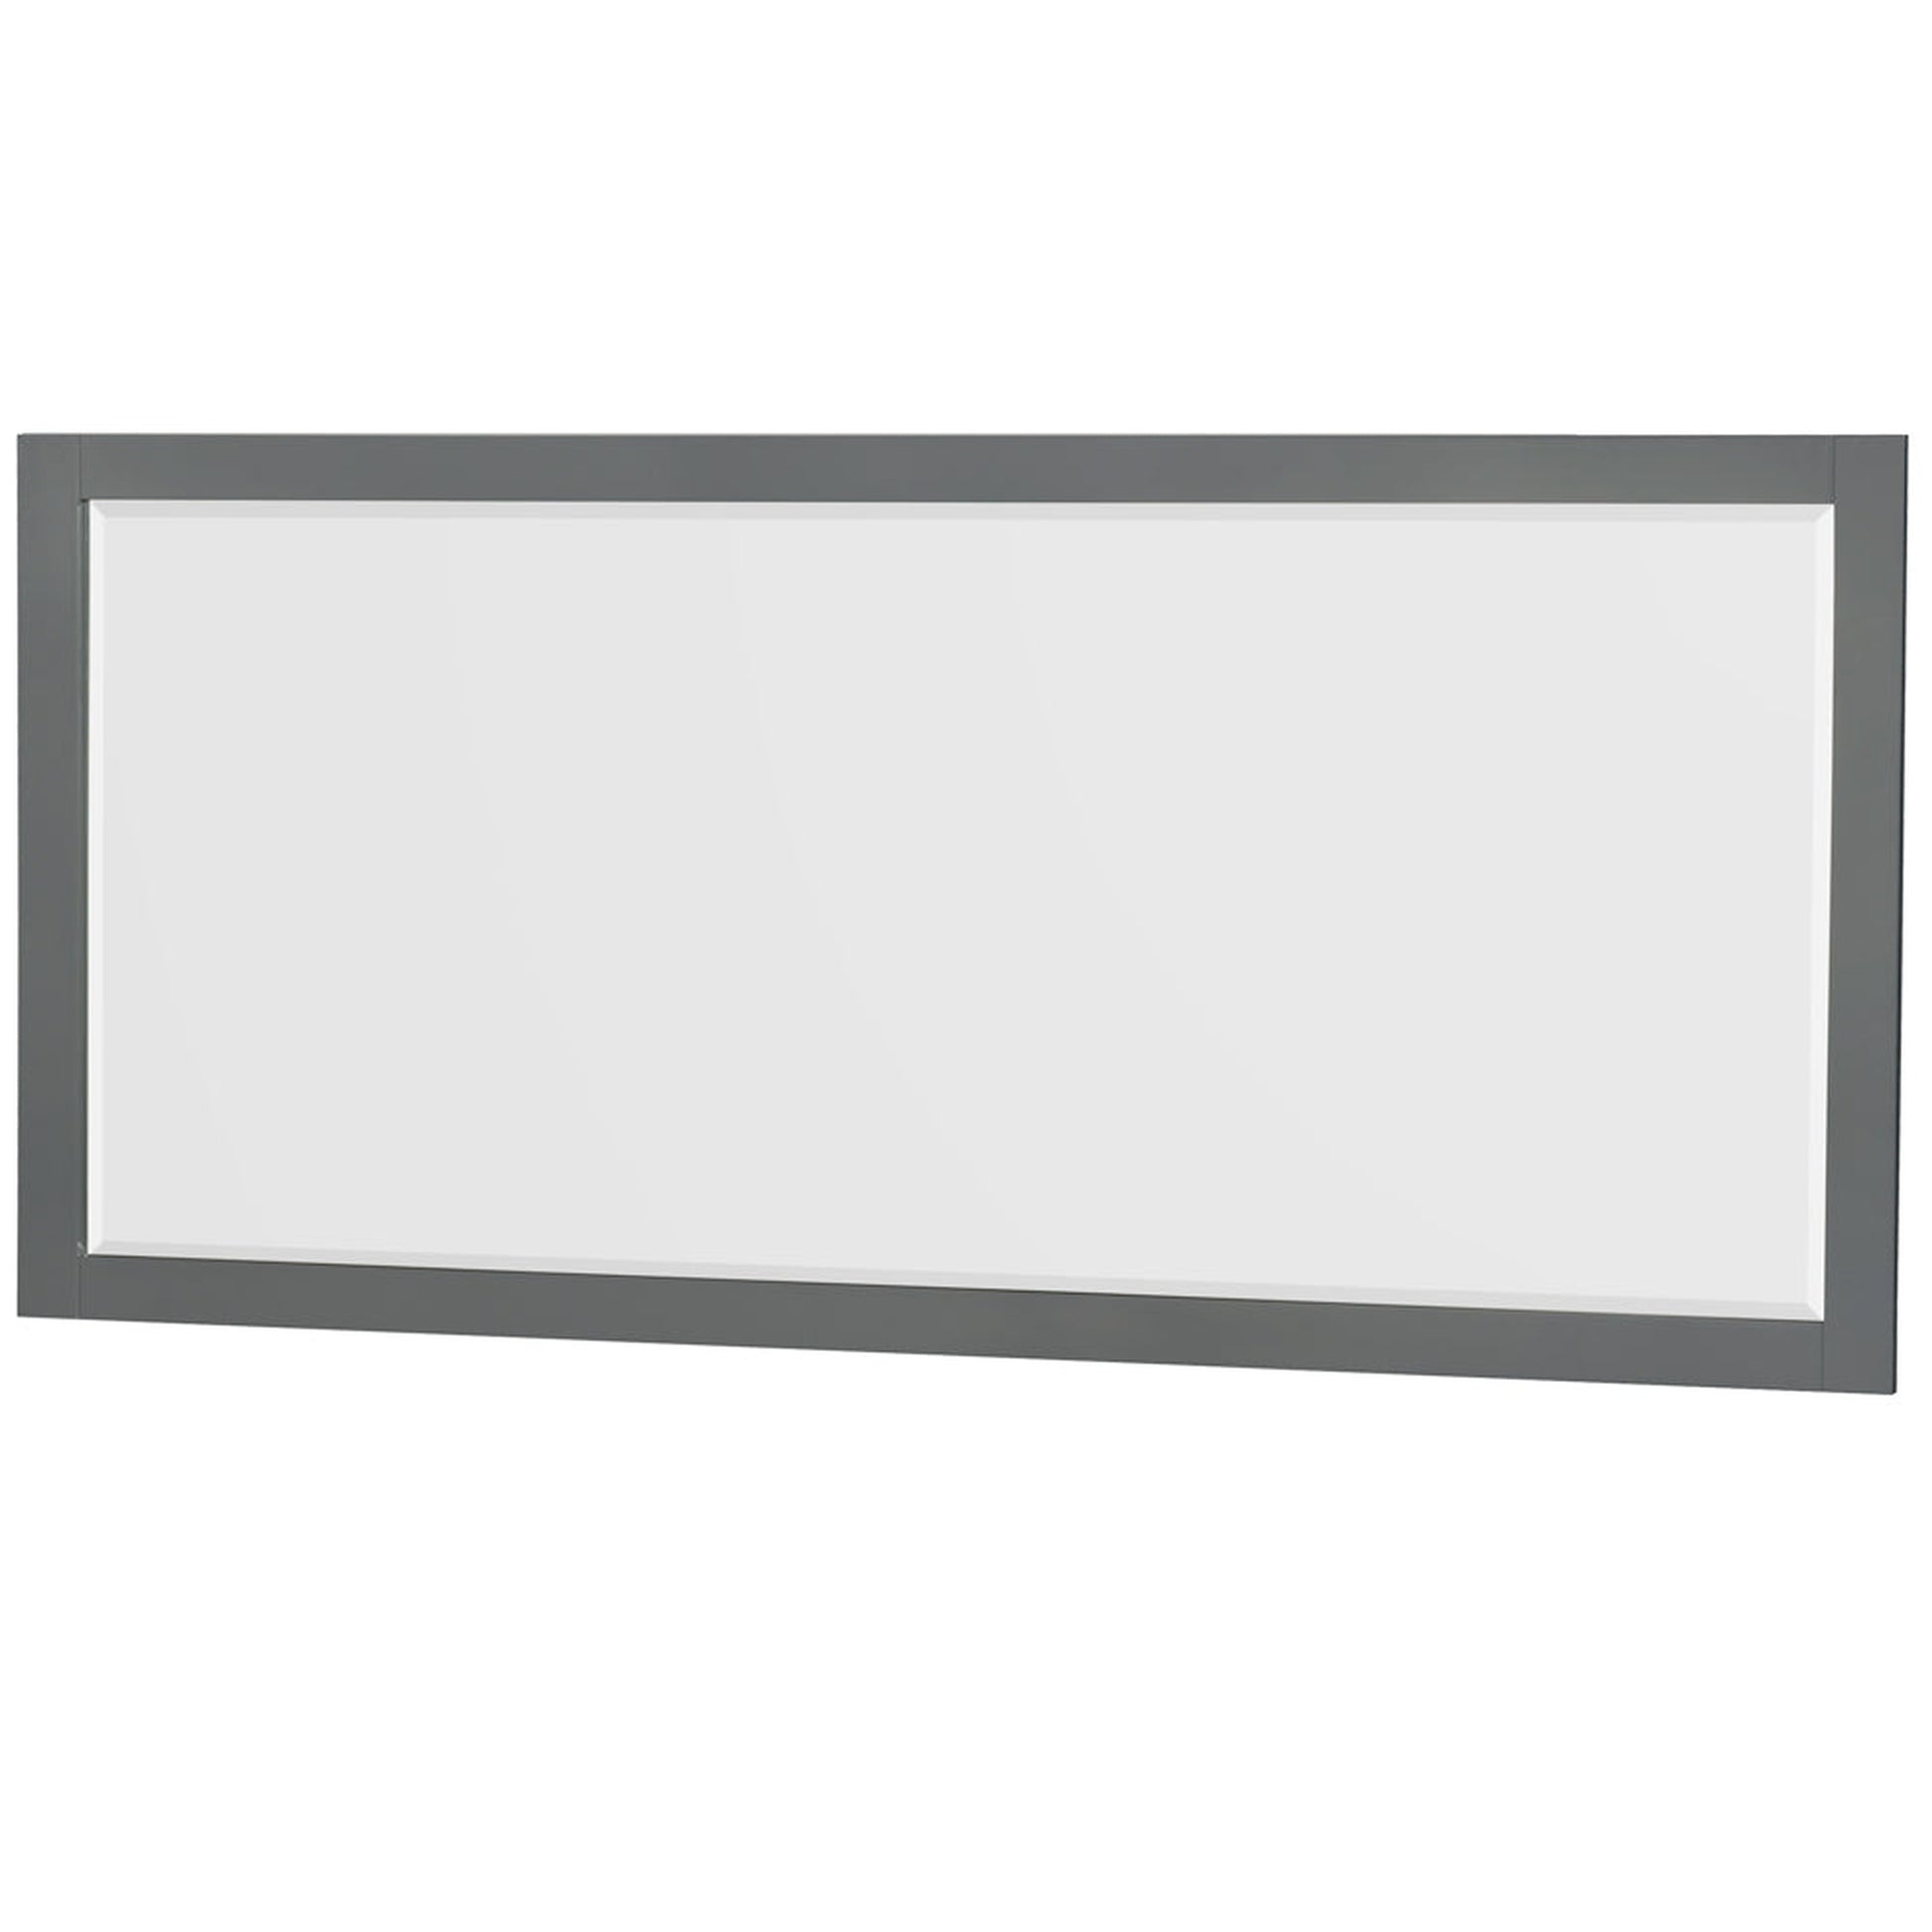 Wyndham Collection Sheffield 72" Double Bathroom Vanity in Dark Gray, White Cultured Marble Countertop, Undermount Square Sinks, 70" Mirror